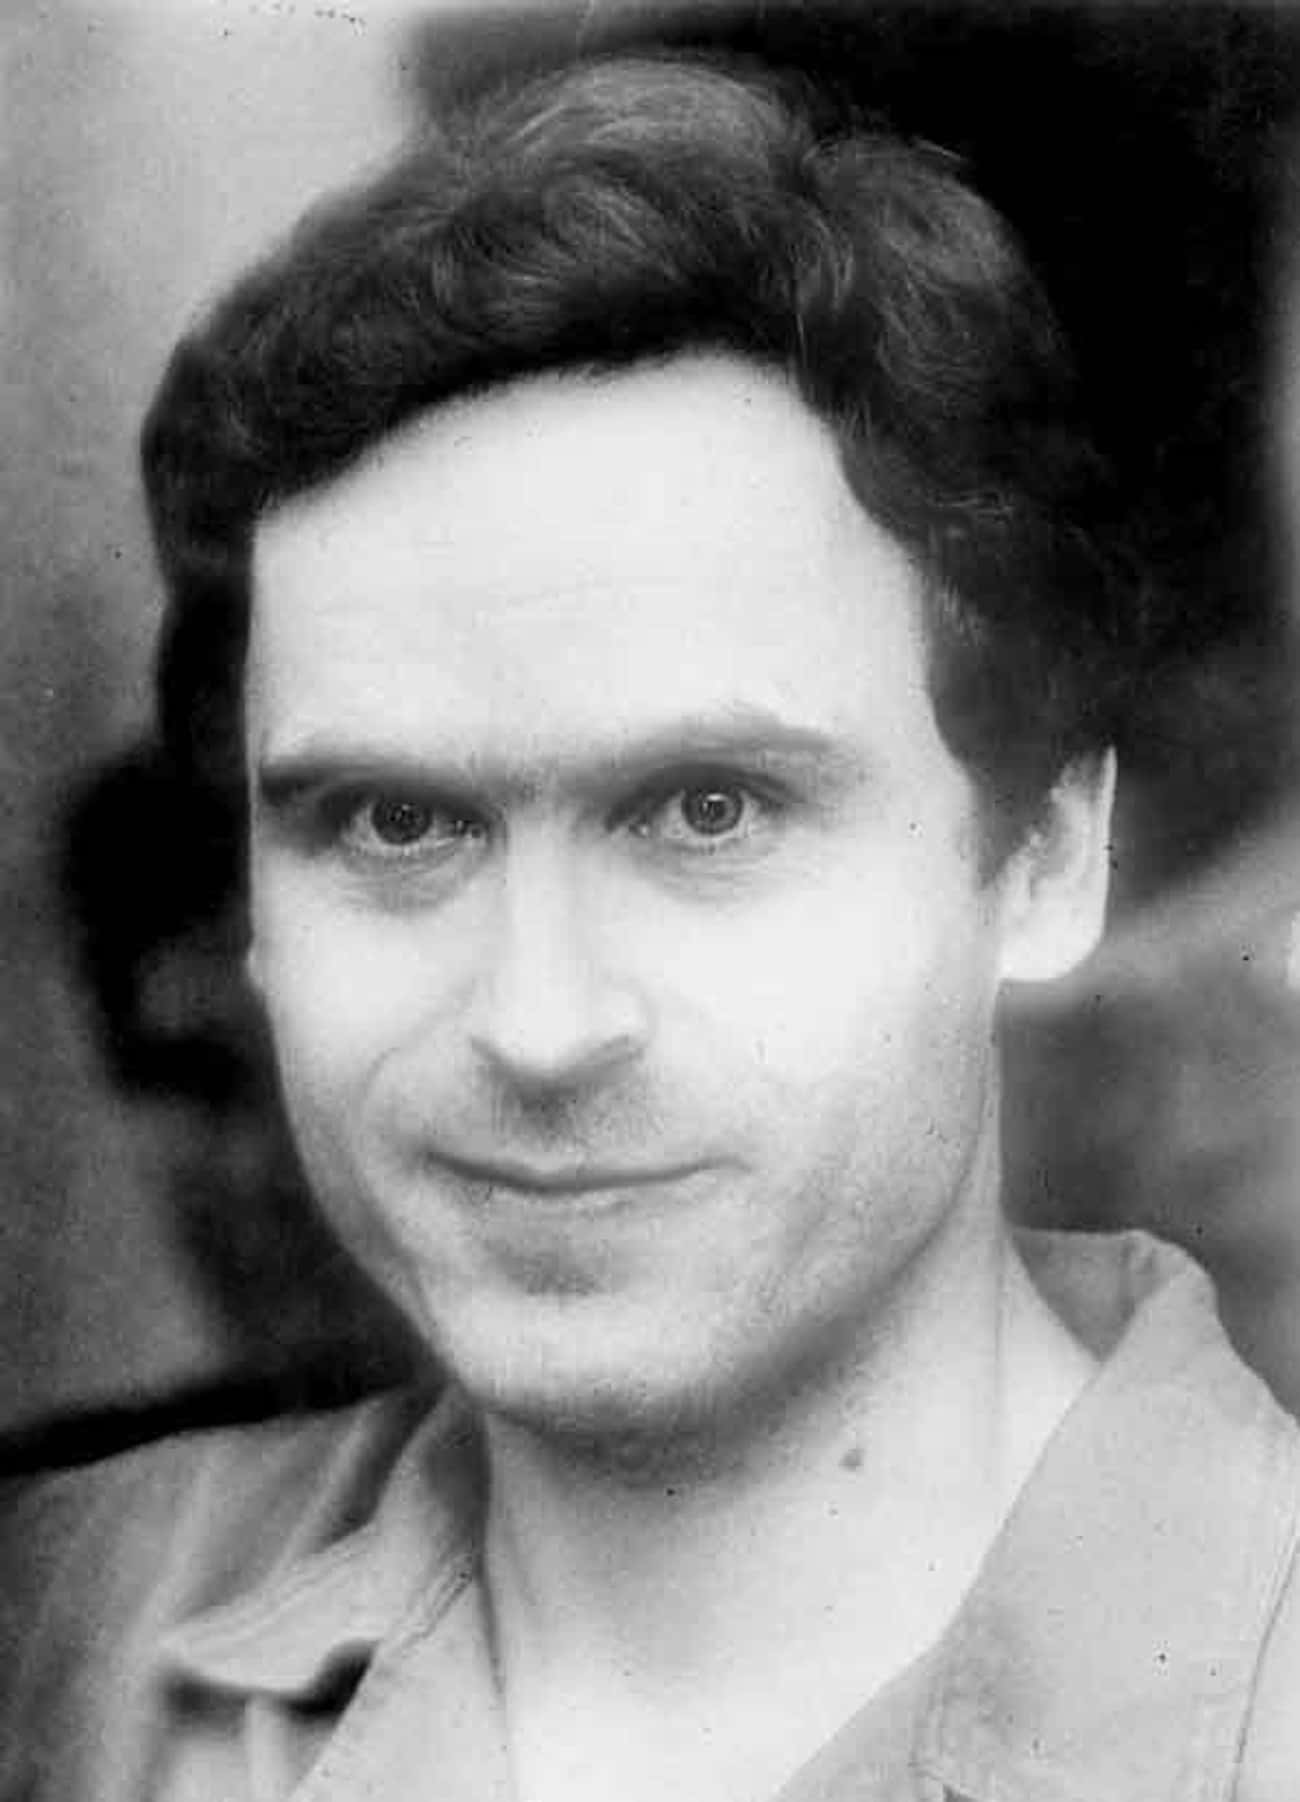 Ted Bundy Severed The Heads Of Some Of His Victims